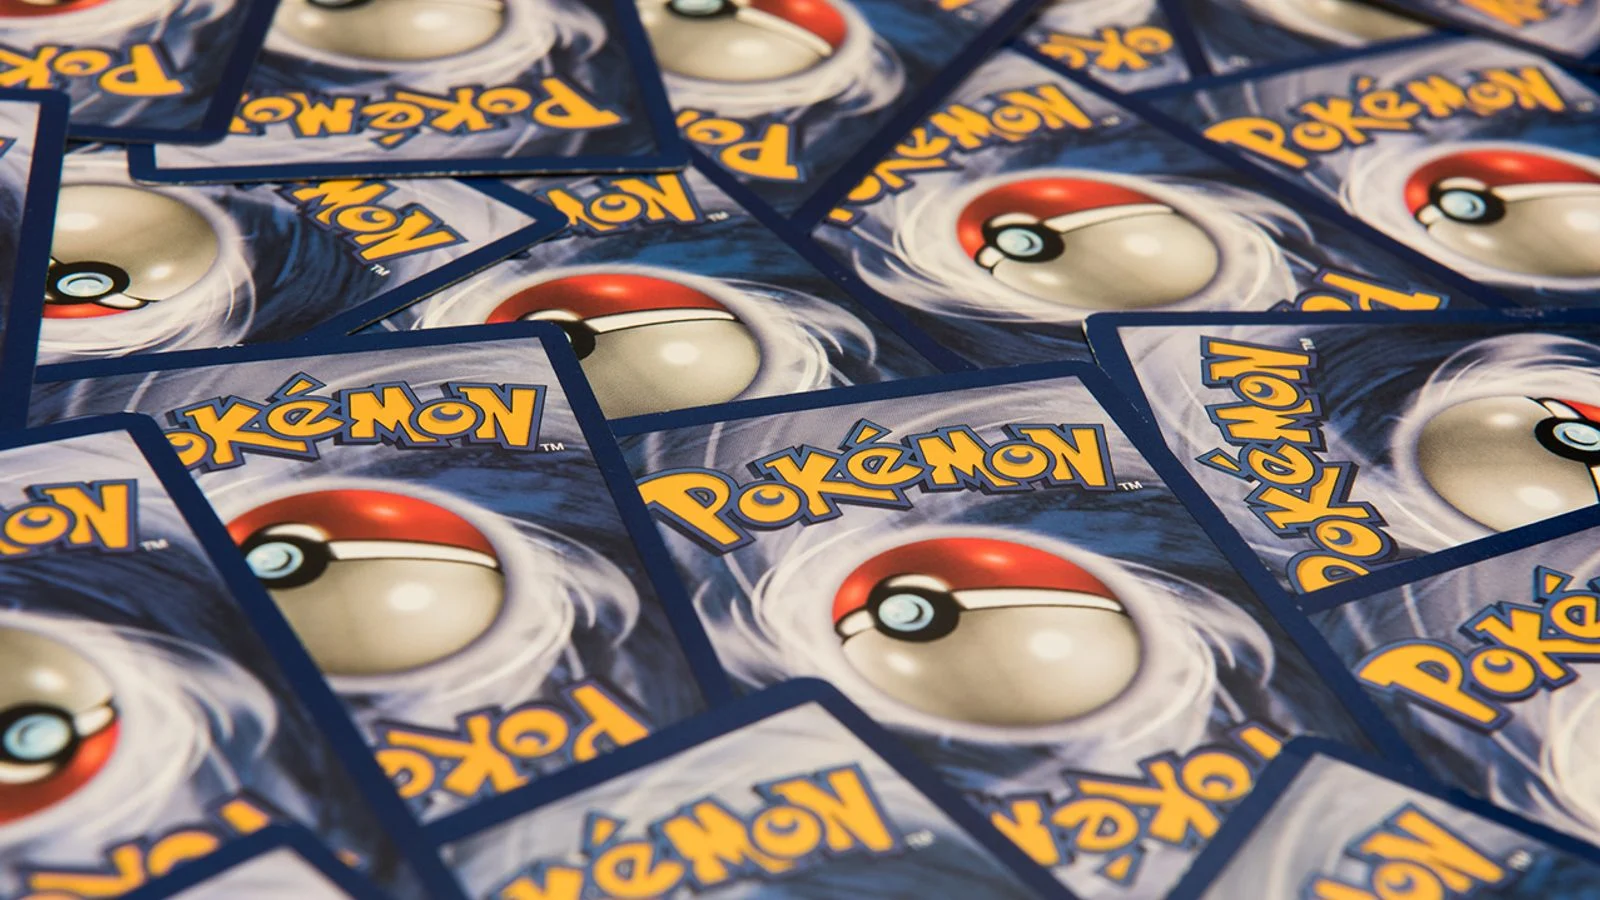 Online Pokemon Card Shopping – What to Look For, and How to Ensure Authenticity